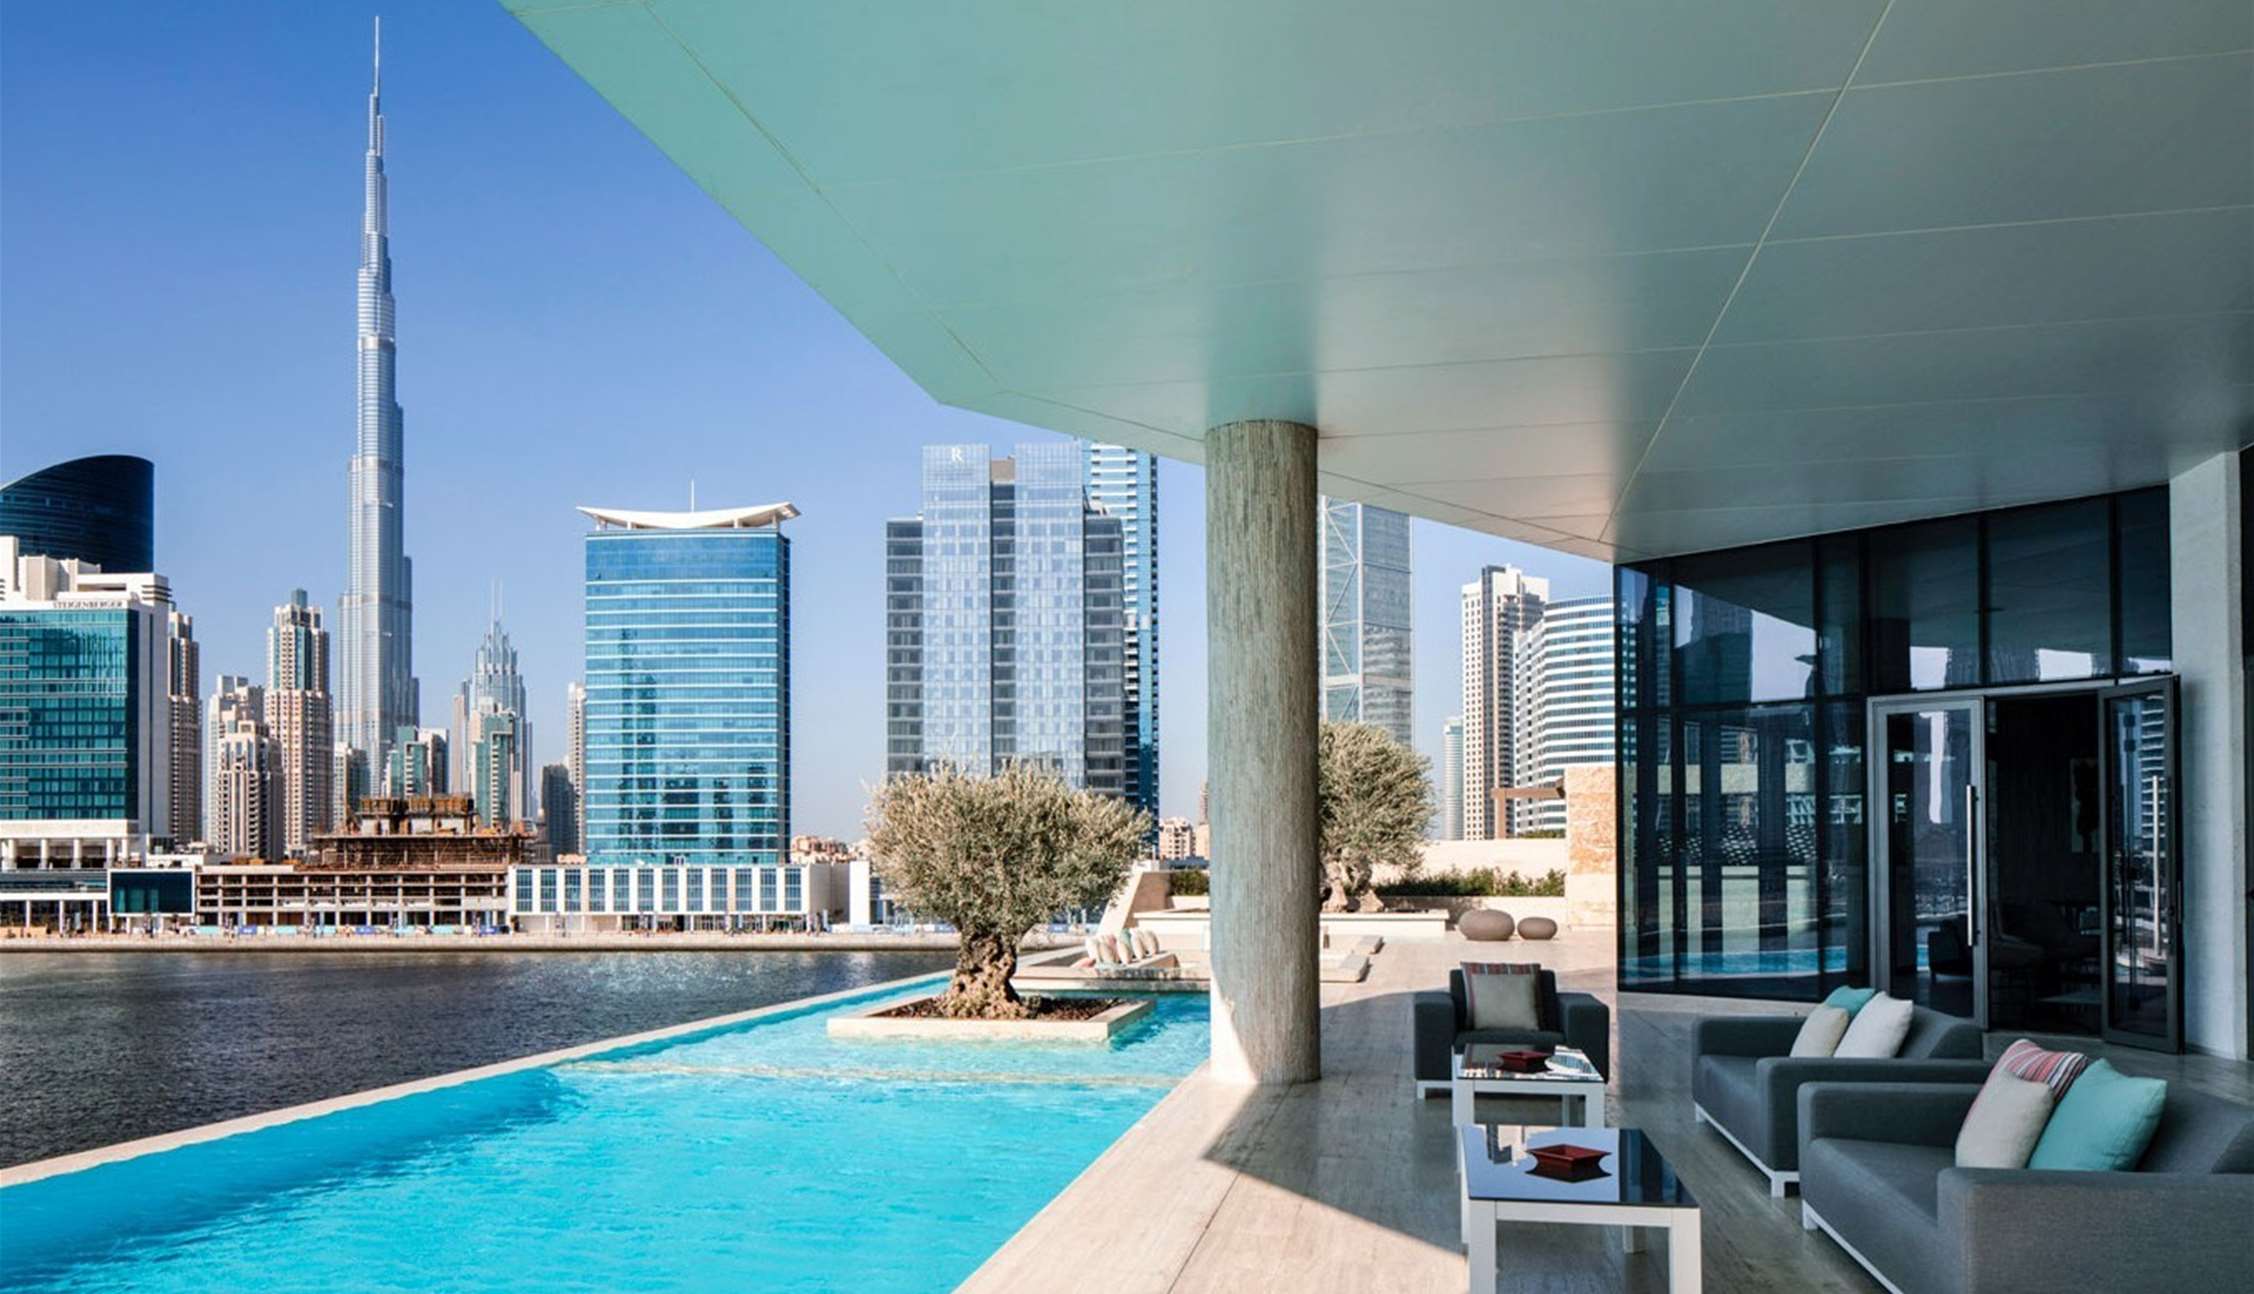 Buy or Rent an Apartment in Dubai